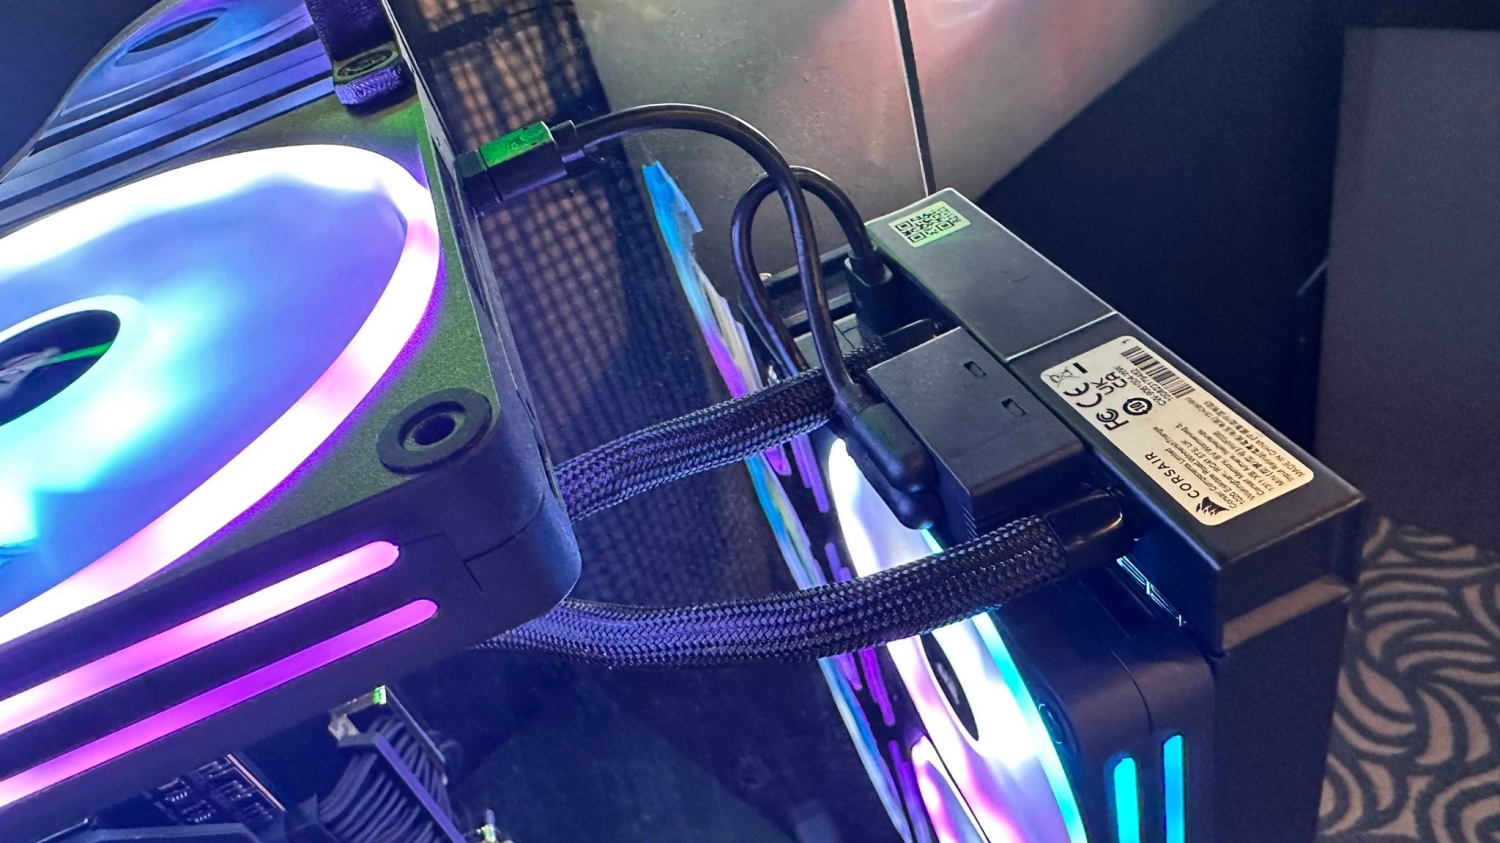 Computex: Corsair unveils new cases, peripherals, watercooling gear and  more